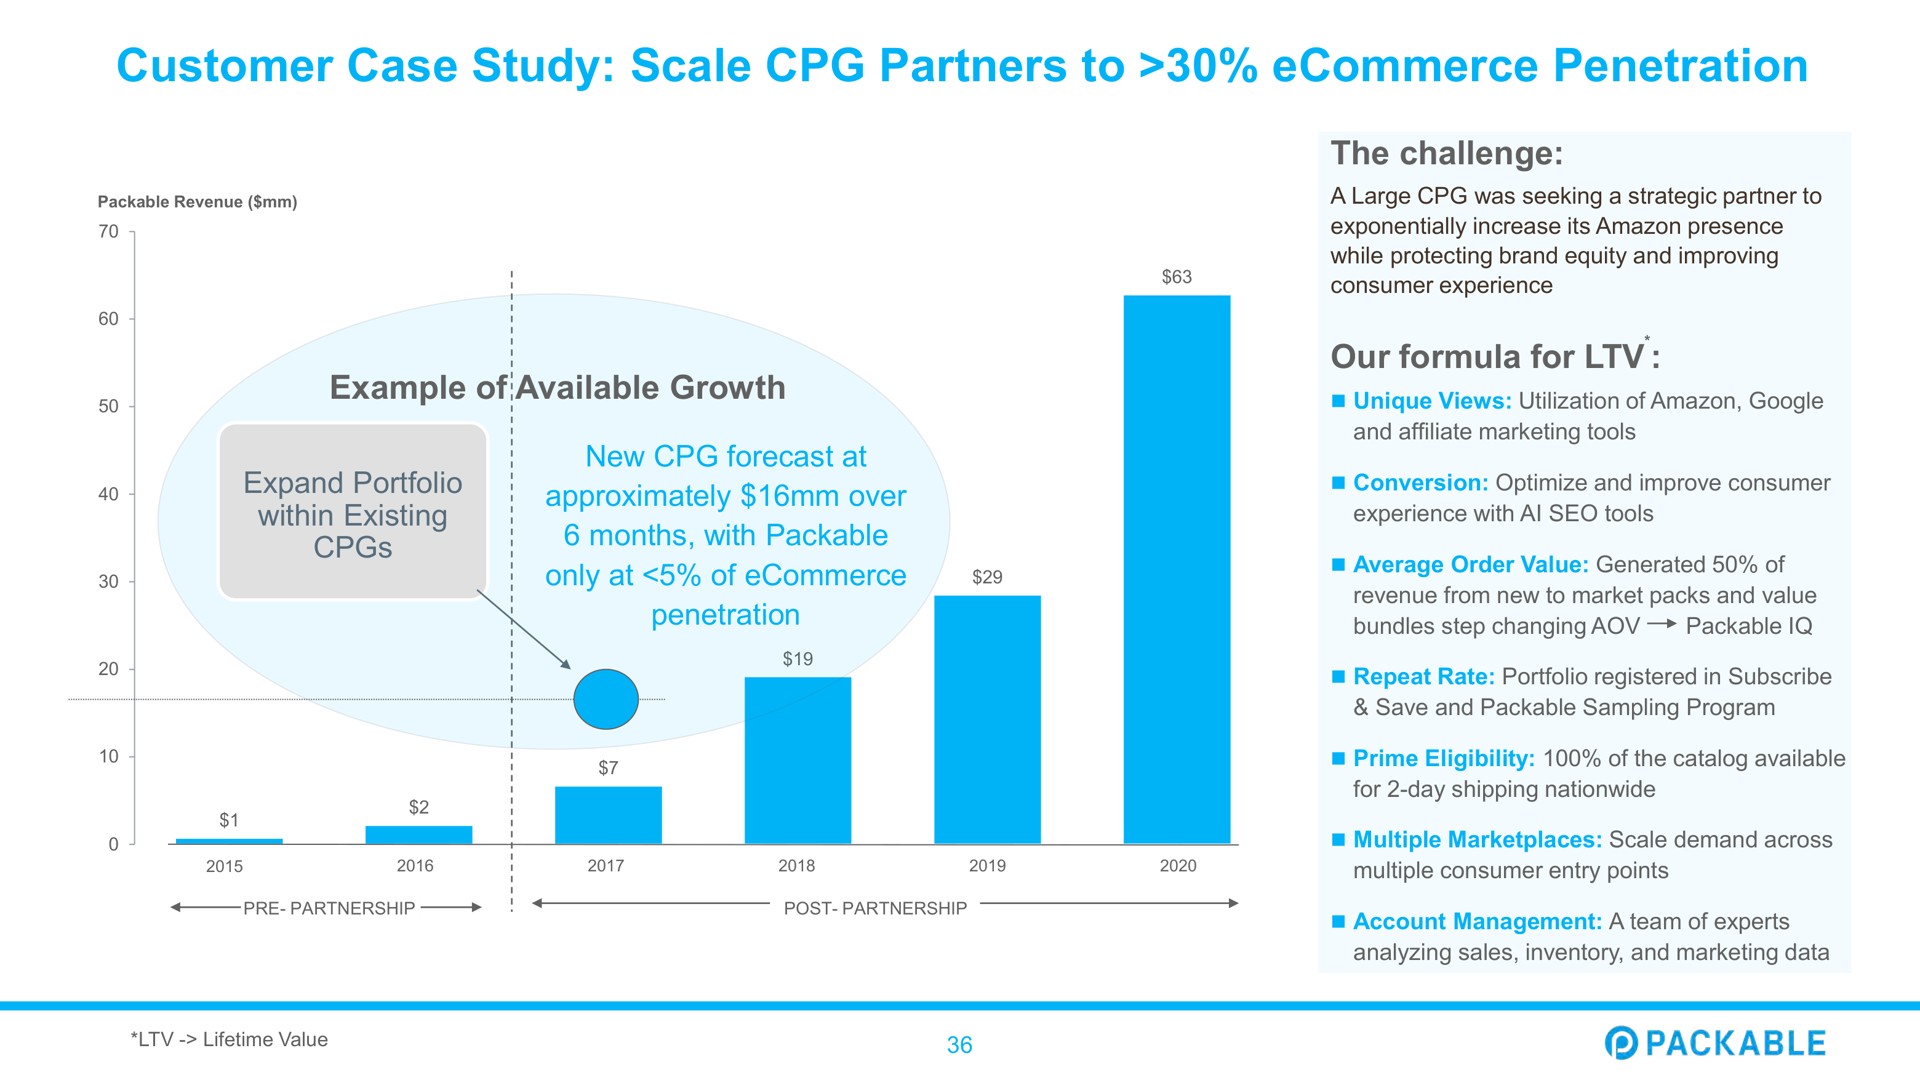 customer case study scale partners to penetration | Packable